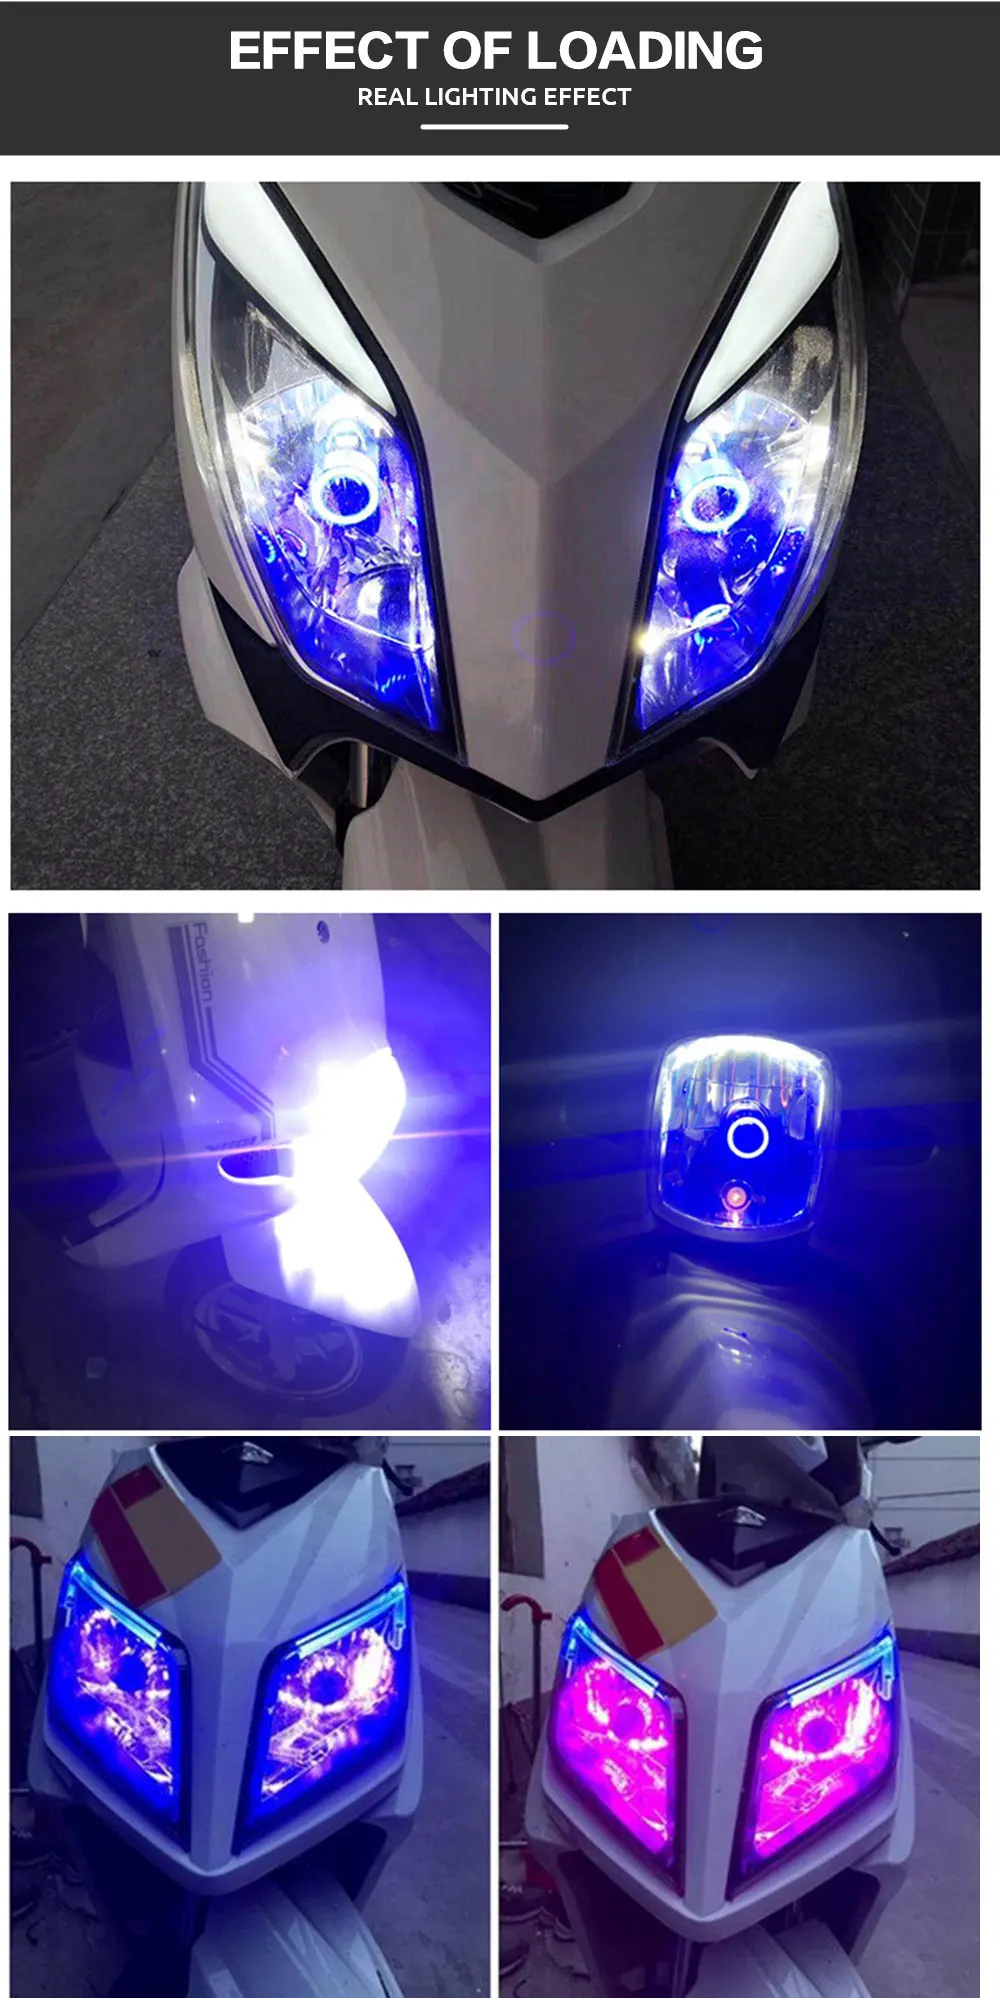 Blue/Red Angel Eye H4 LED Motorcycle Headlight Ba20d HS1 H6 Scooter Motorbike Headlamp Light Bulb DRL Accessories DC 12-80V